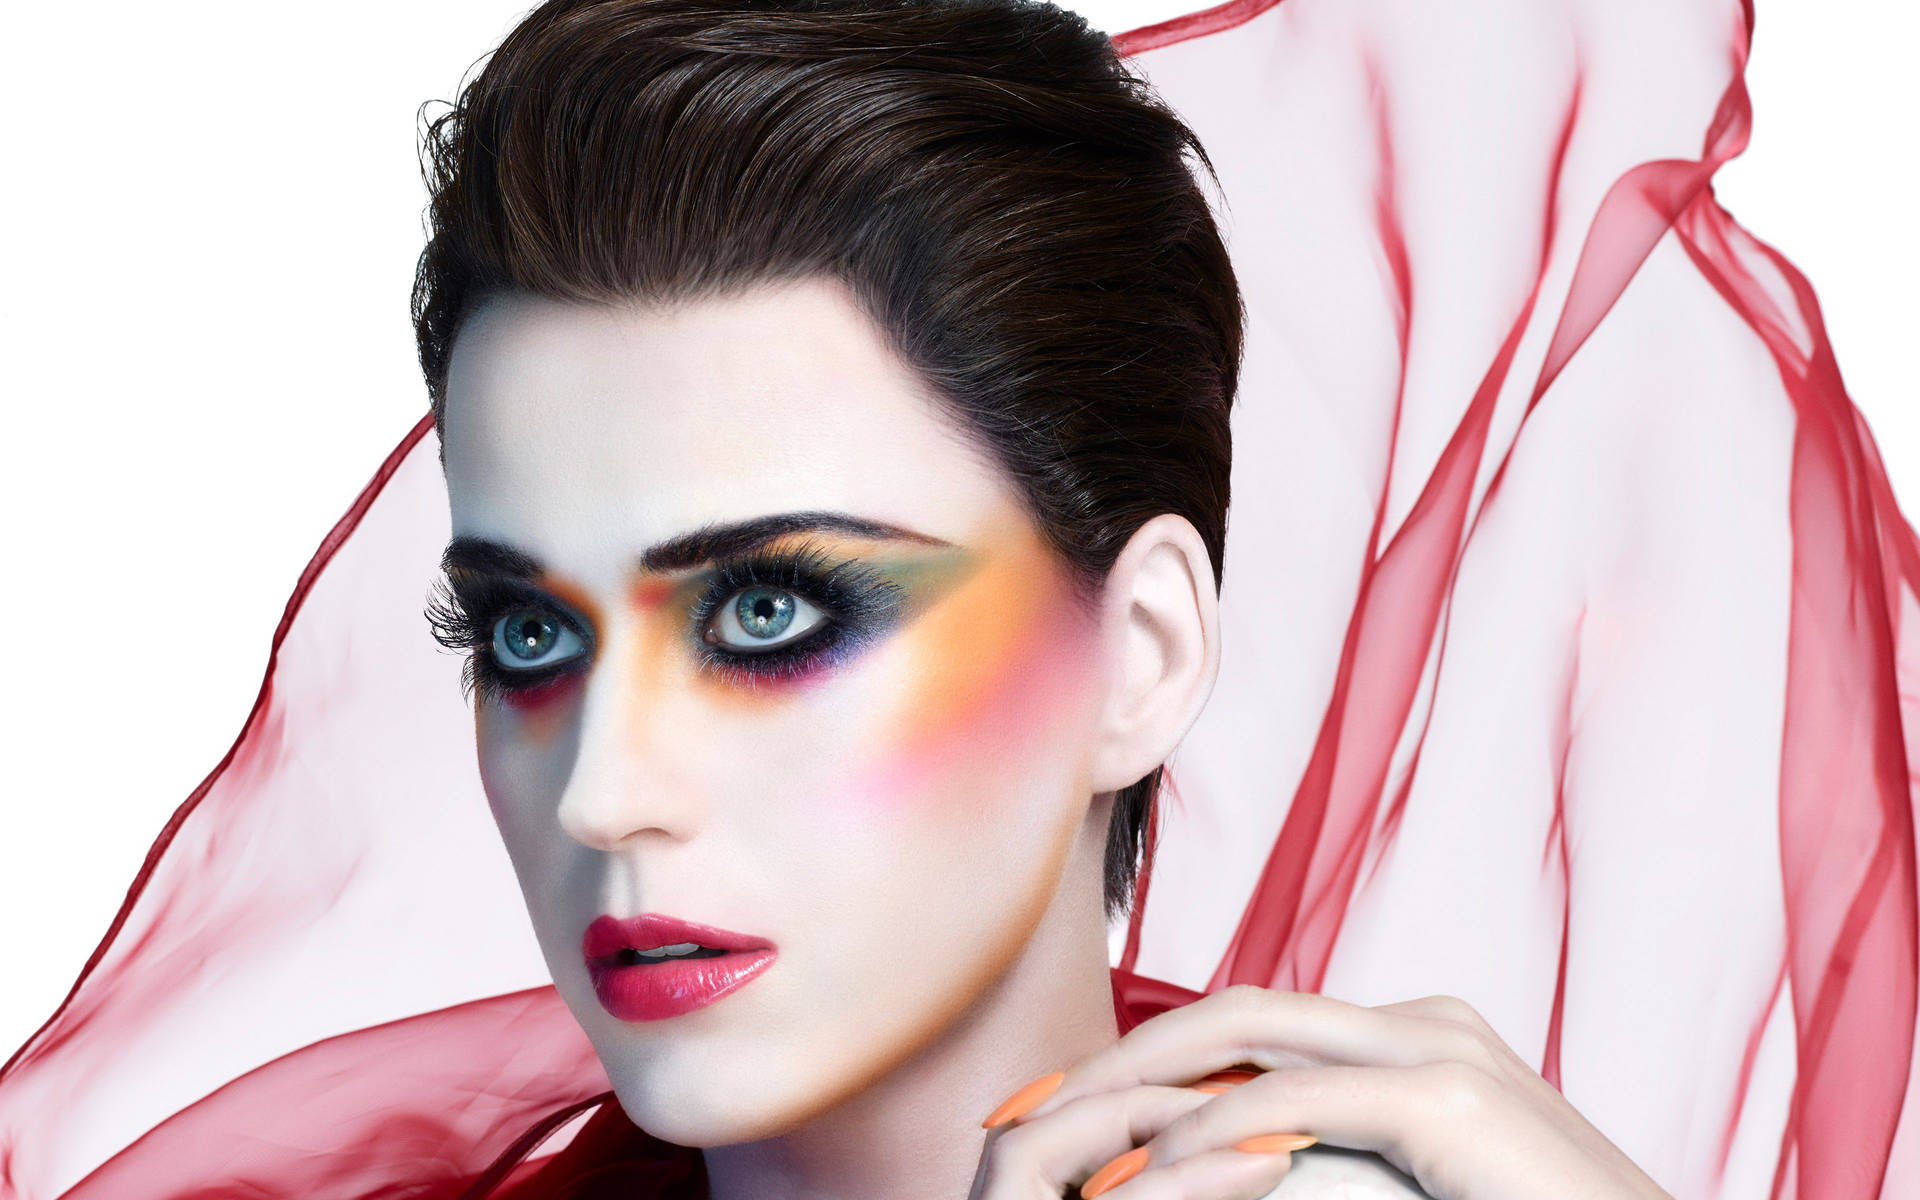 Katy Perry radiates with beauty in couture makeup. Wallpaper